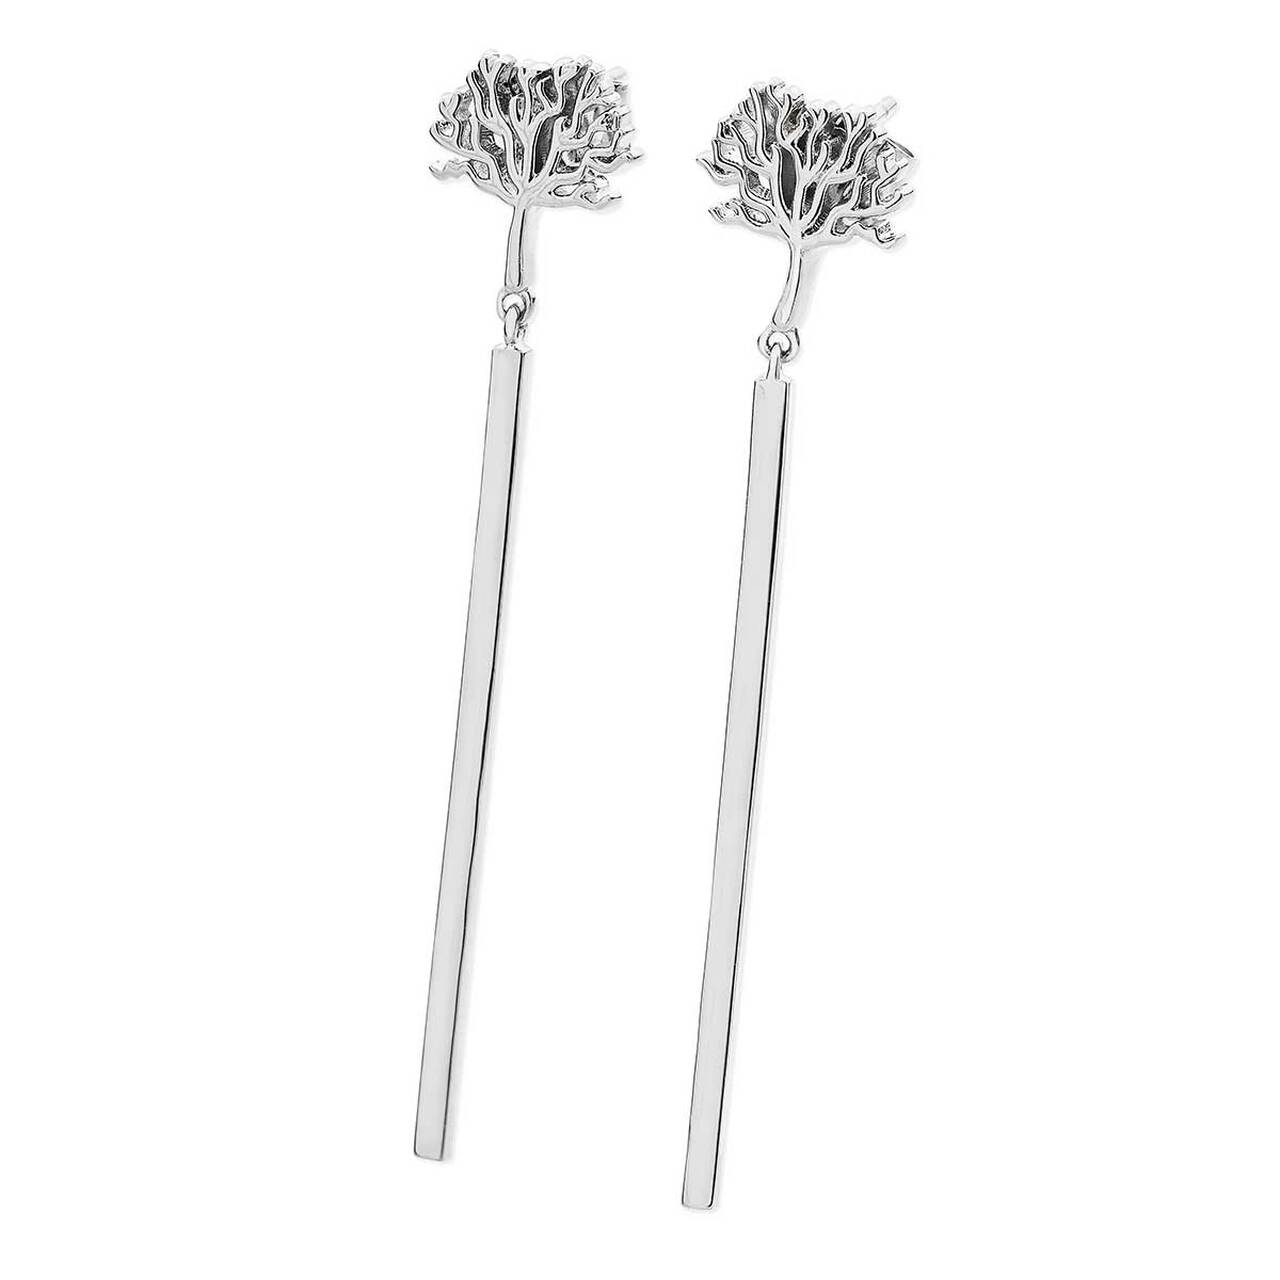 Tipperary Crystal Silver Tree Earrings With Drop Bar  Organic and sleek, these beautiful earrings are crafted in polished silver and consist of a tree of life from which a sleek polished silver bar suspends elegantly. These earrings secure comfortably with push backs.